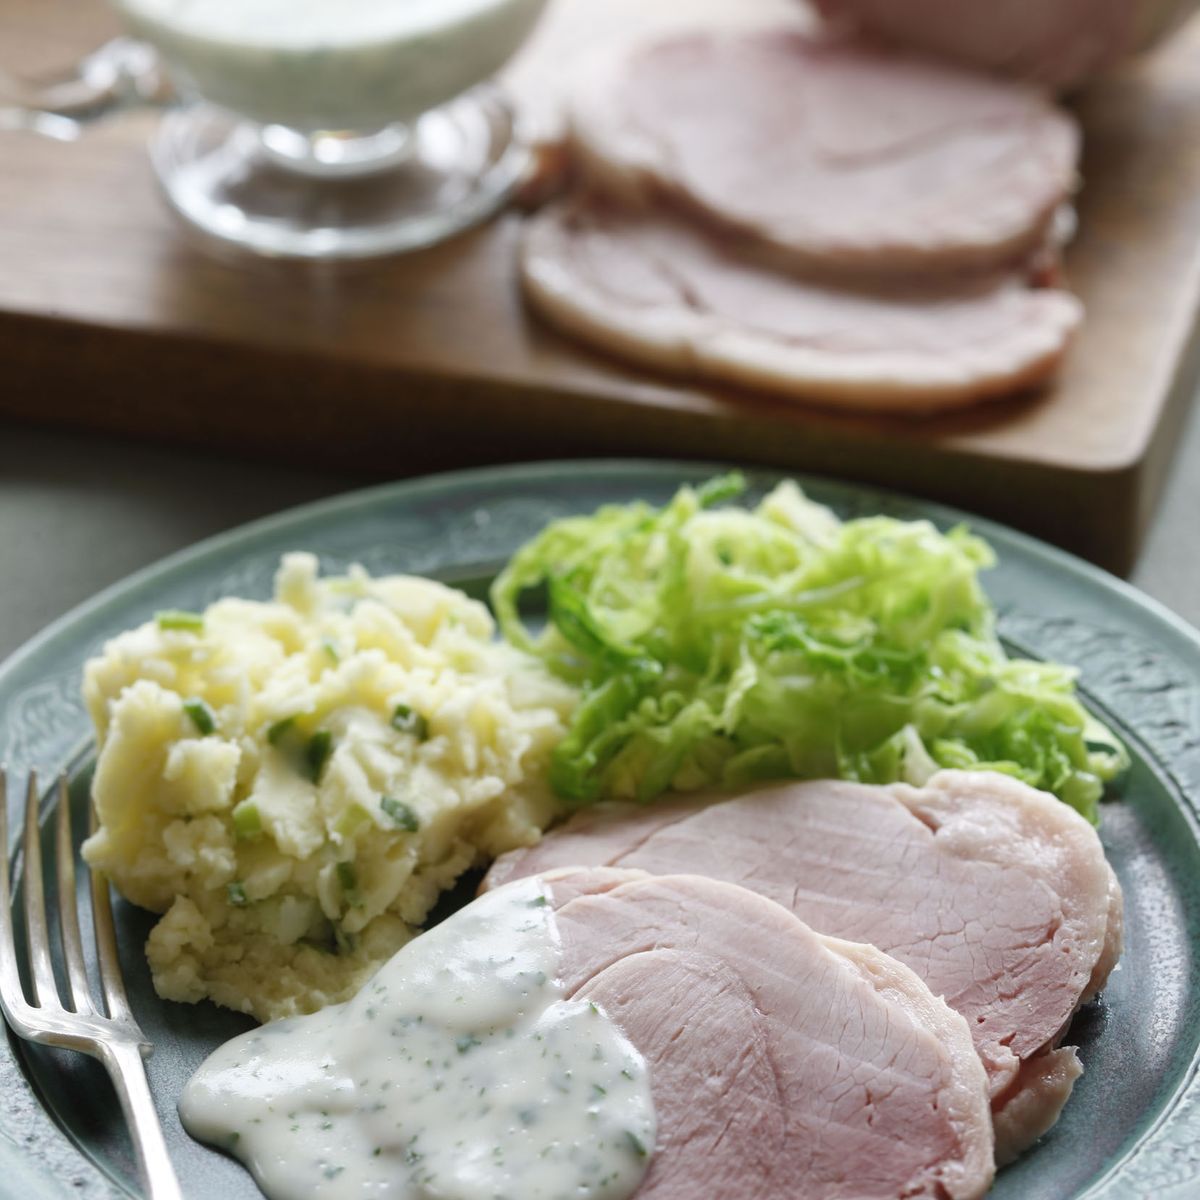 Irish Boiled Bacon And Cabbage Recipe On Food52,Ikea Built In Bookshelf Hack